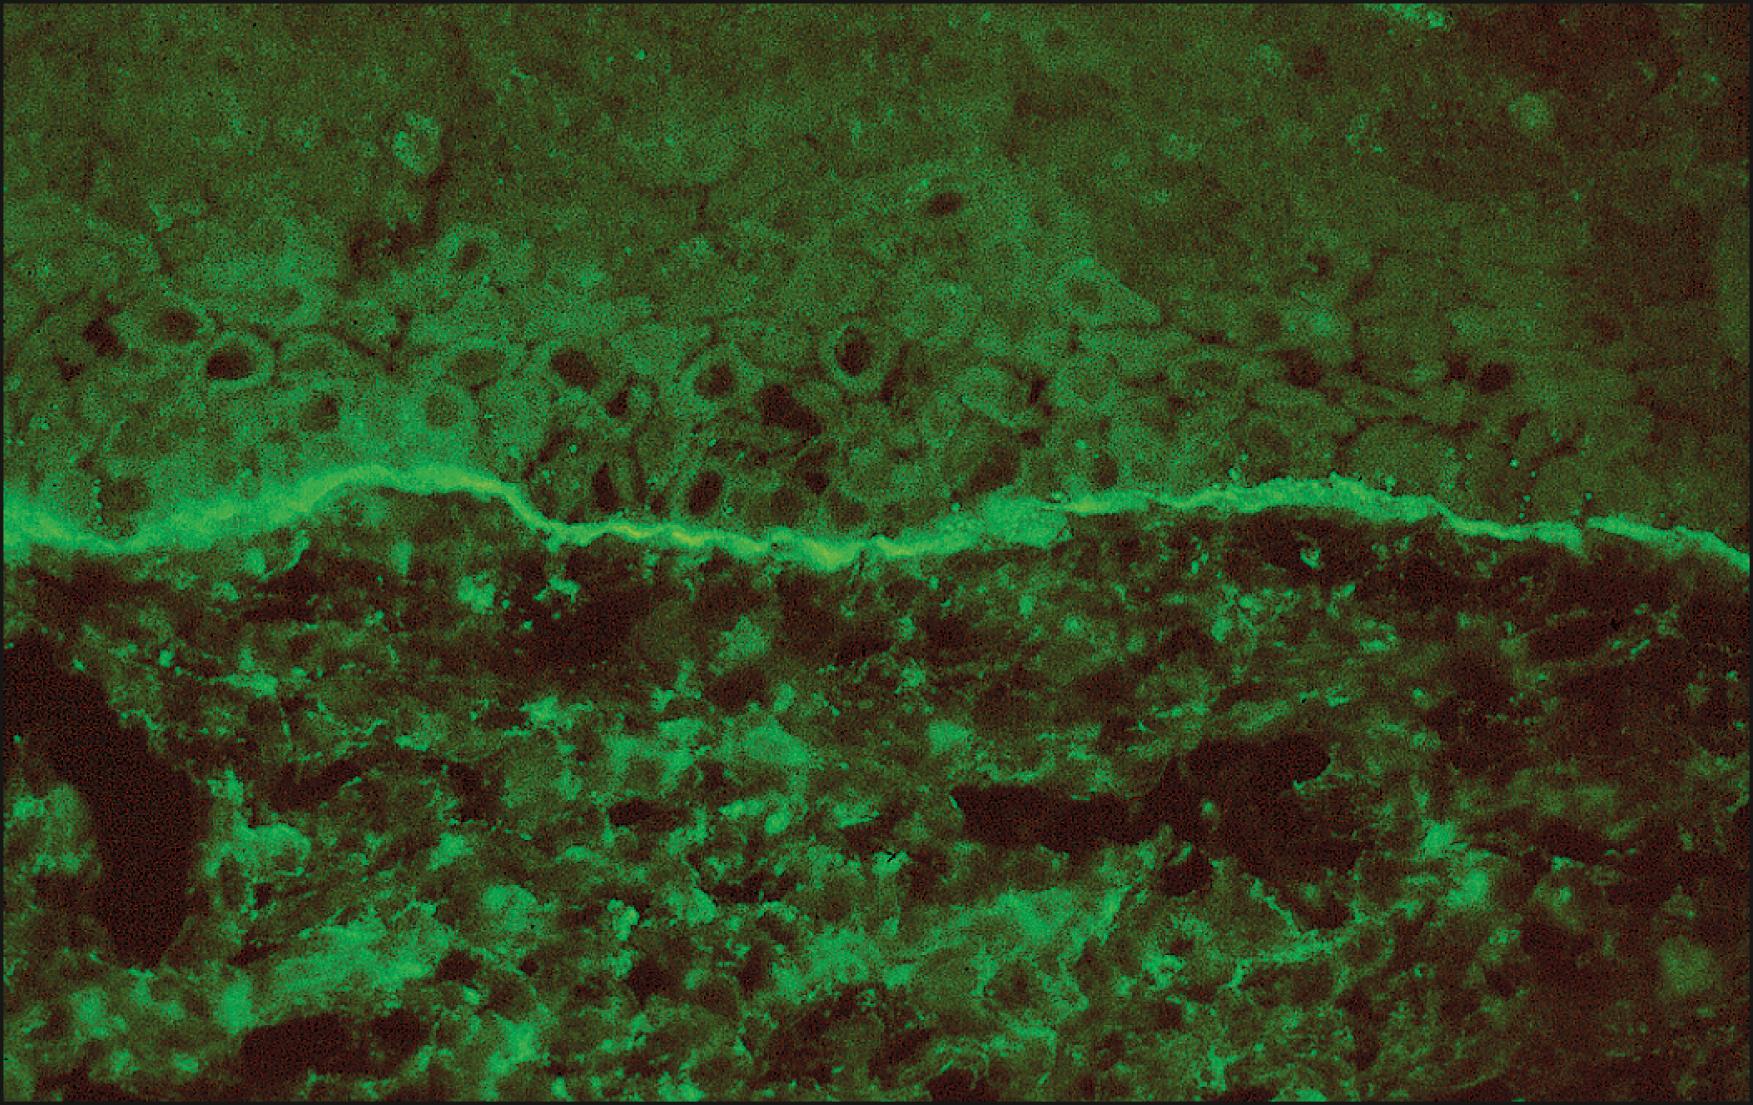 Fig. 45.1, Immunofluorescence microscopy, 40×, conjunctival biopsy from the inflamed bulbar conjunctiva of a patient suspected of having OCP. The cryopreserved tissue has been sectioned at 4 μm and incubated with a rabbit antibody directed against human IgG, fluorescein-labeled. Note the bright apple-green linear pattern of fluorescence at the conjunctival epithelial basement membrane zone, indicating the deposition of IgG at the basement membrane, providing immunohistopathologic confirmation of the suspected clinical diagnosis.